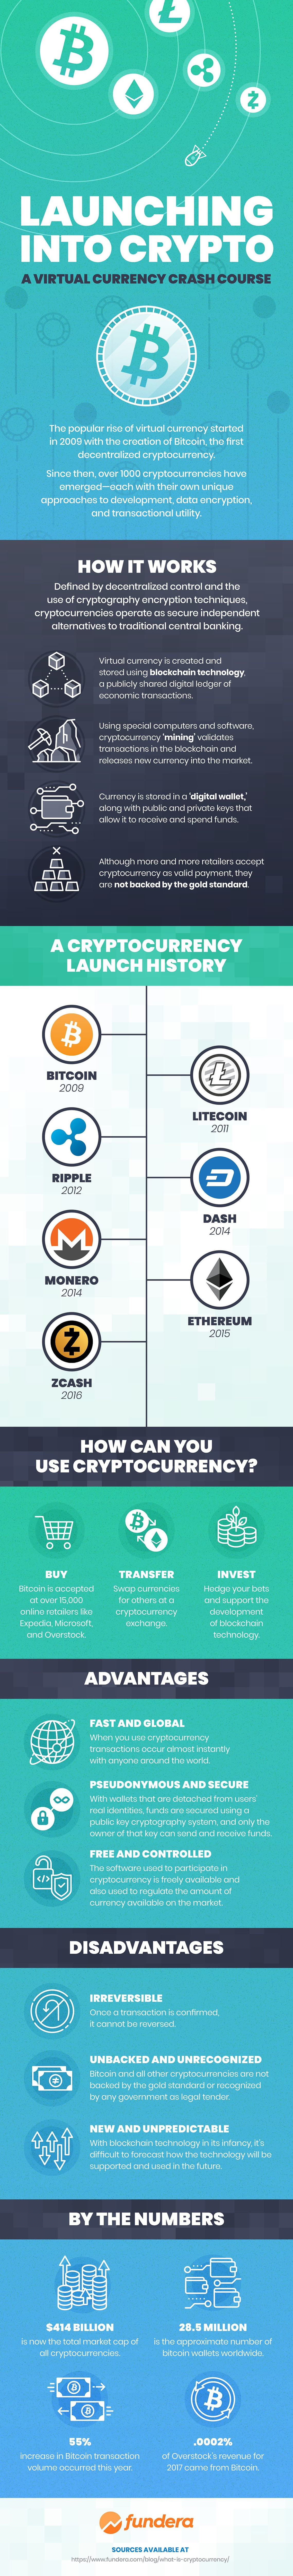 Launching into crypto: A virtual currency crash course - infographic